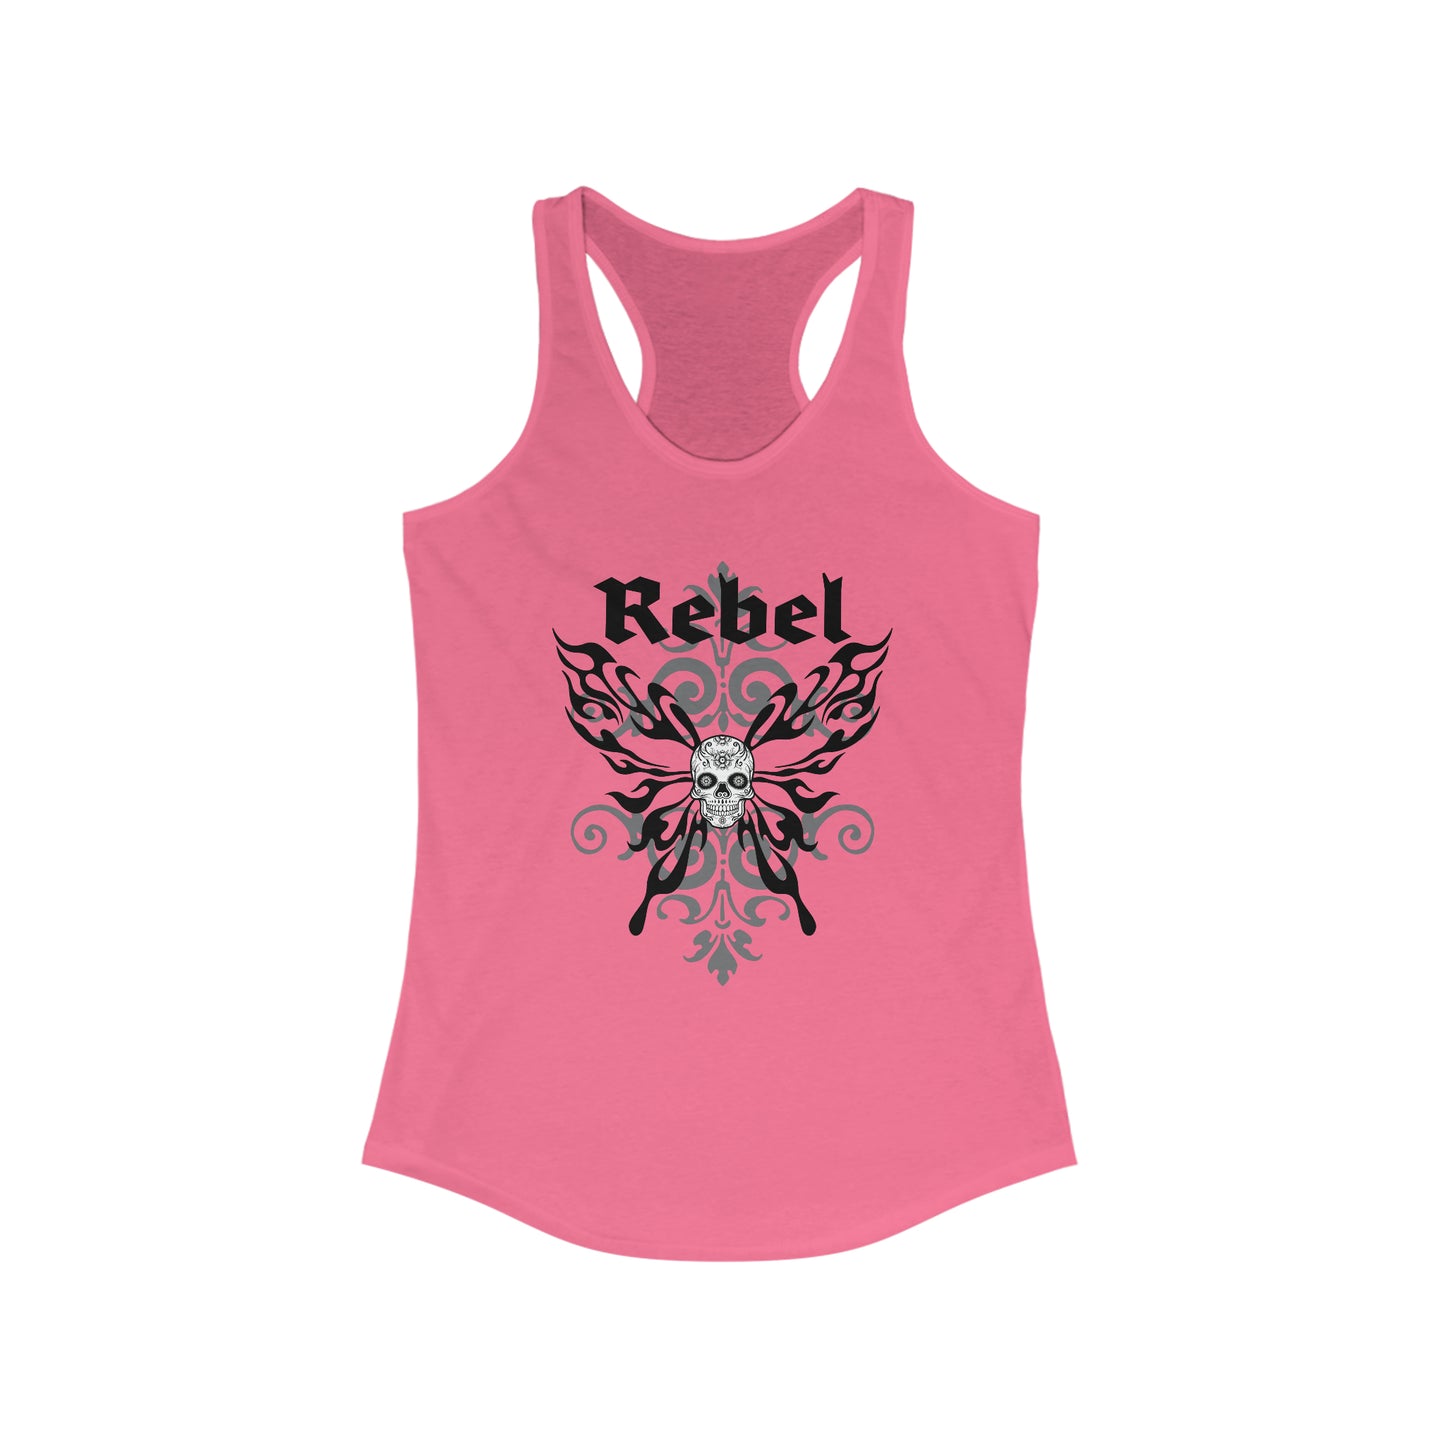 Rebel Tank Top For Day Of The Dead Top For Butterfly Tank For Sugar Skull Racer Back Tank For Conservative Ladies